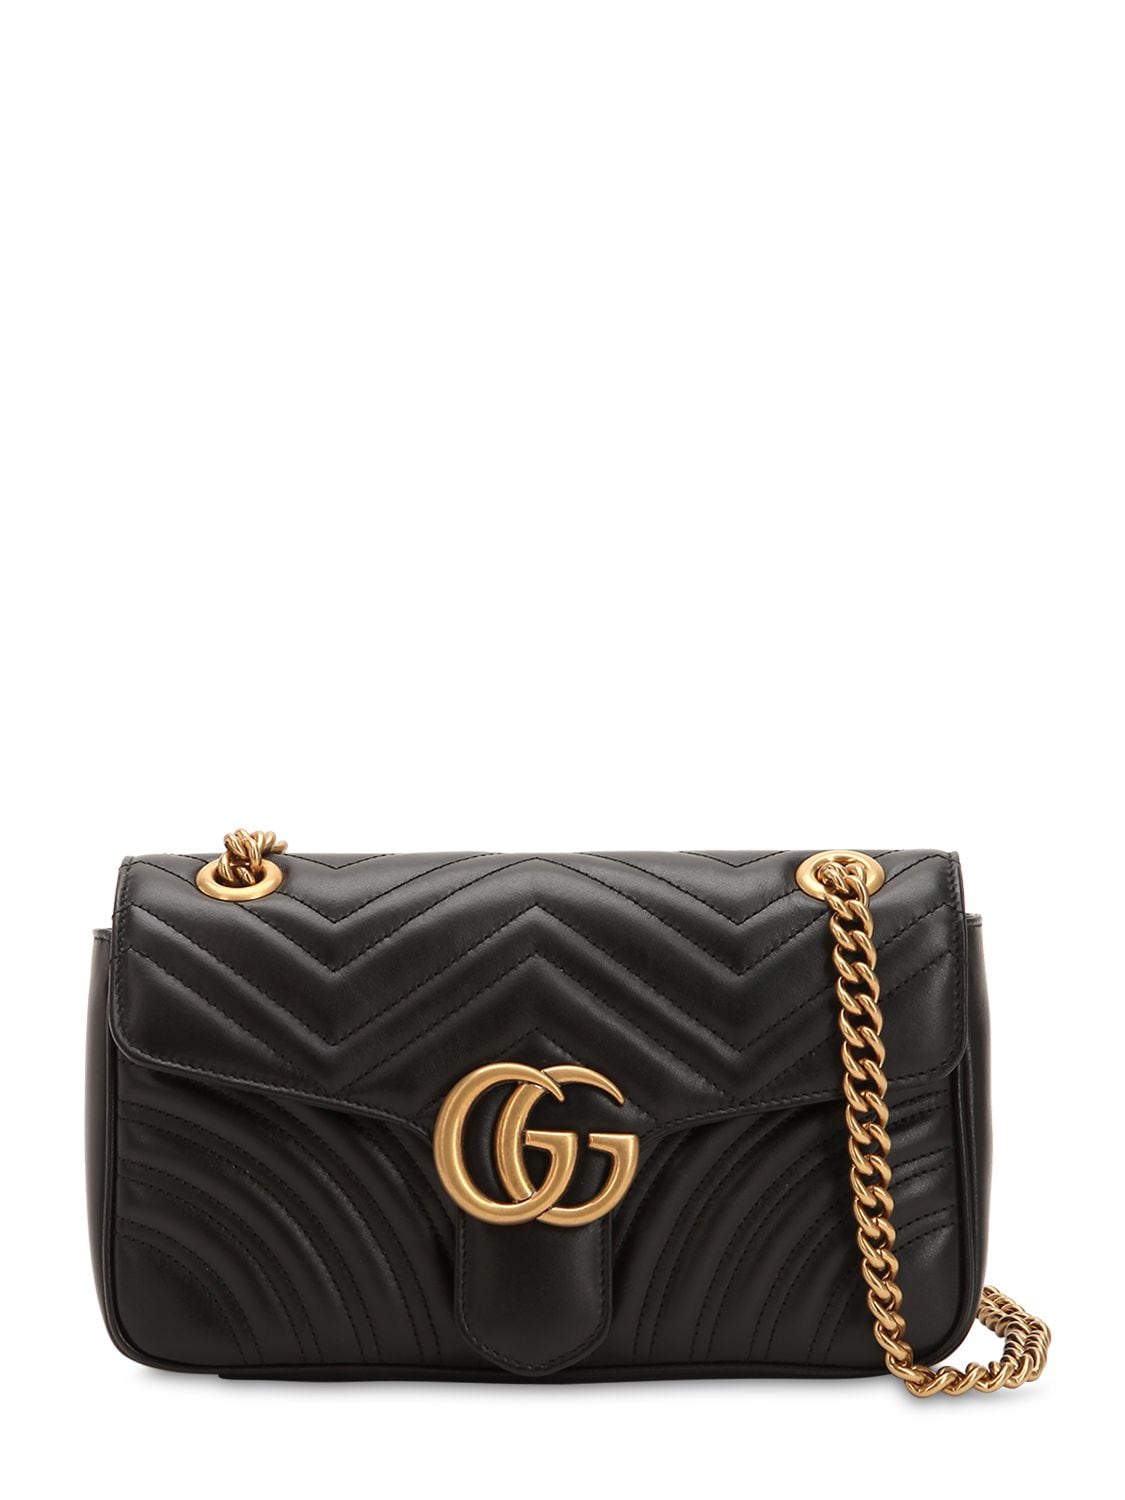 Gucci Gg Marmont Small Shoulder Bag In Black | ModeSens